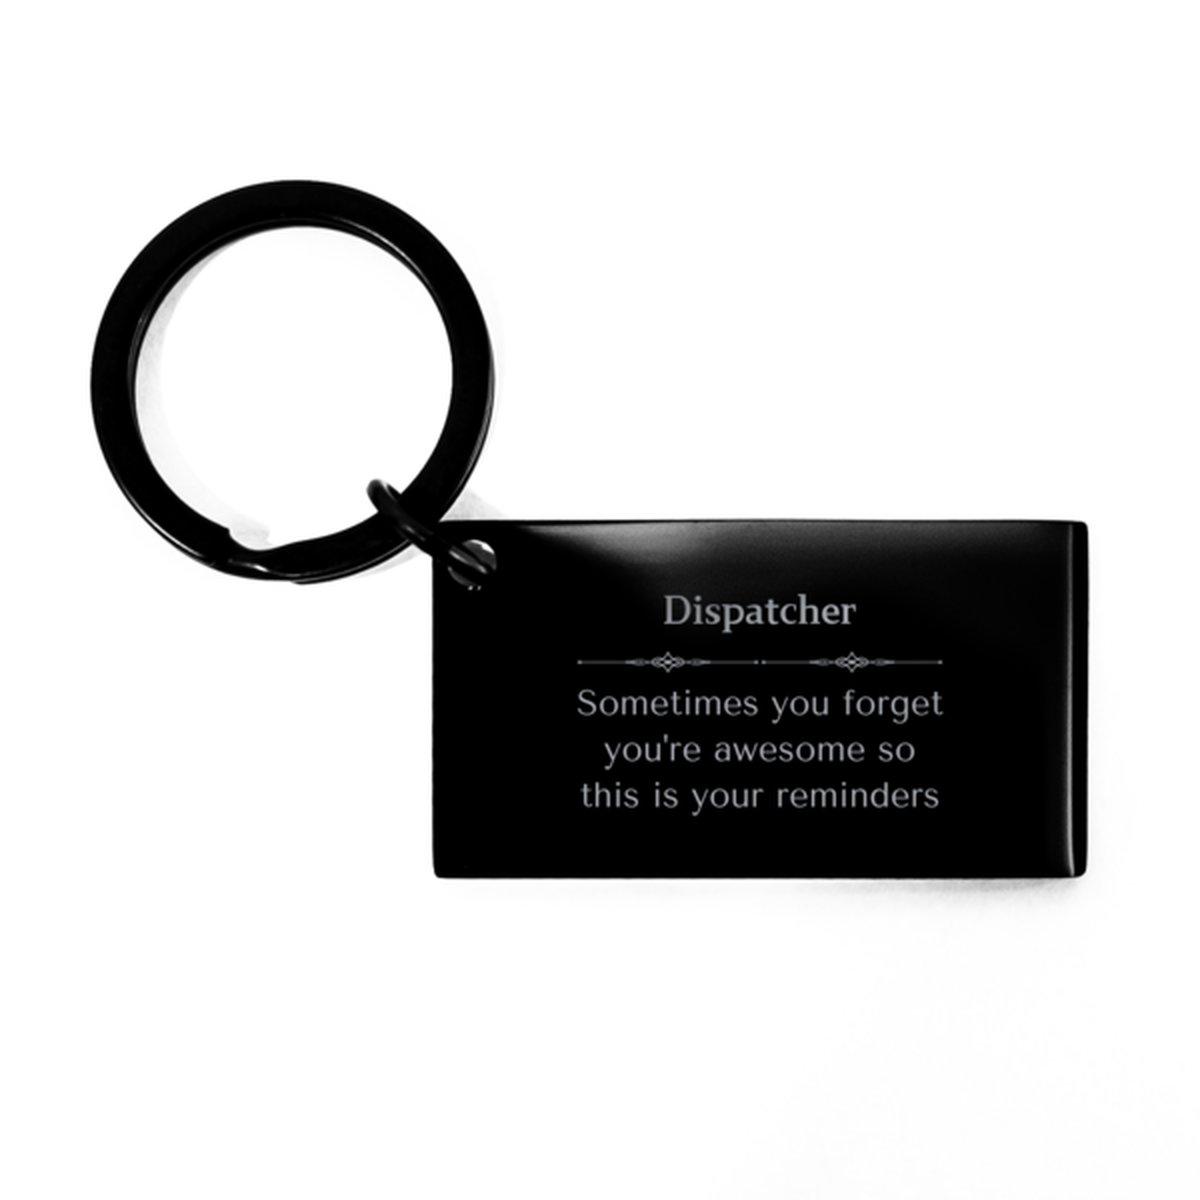 Sentimental Dispatcher Keychain, Hairstylist Sometimes you forget you're awesome so this is your reminders, Graduation Christmas Birthday Gifts for Dispatcher, Men, Women, Coworkers